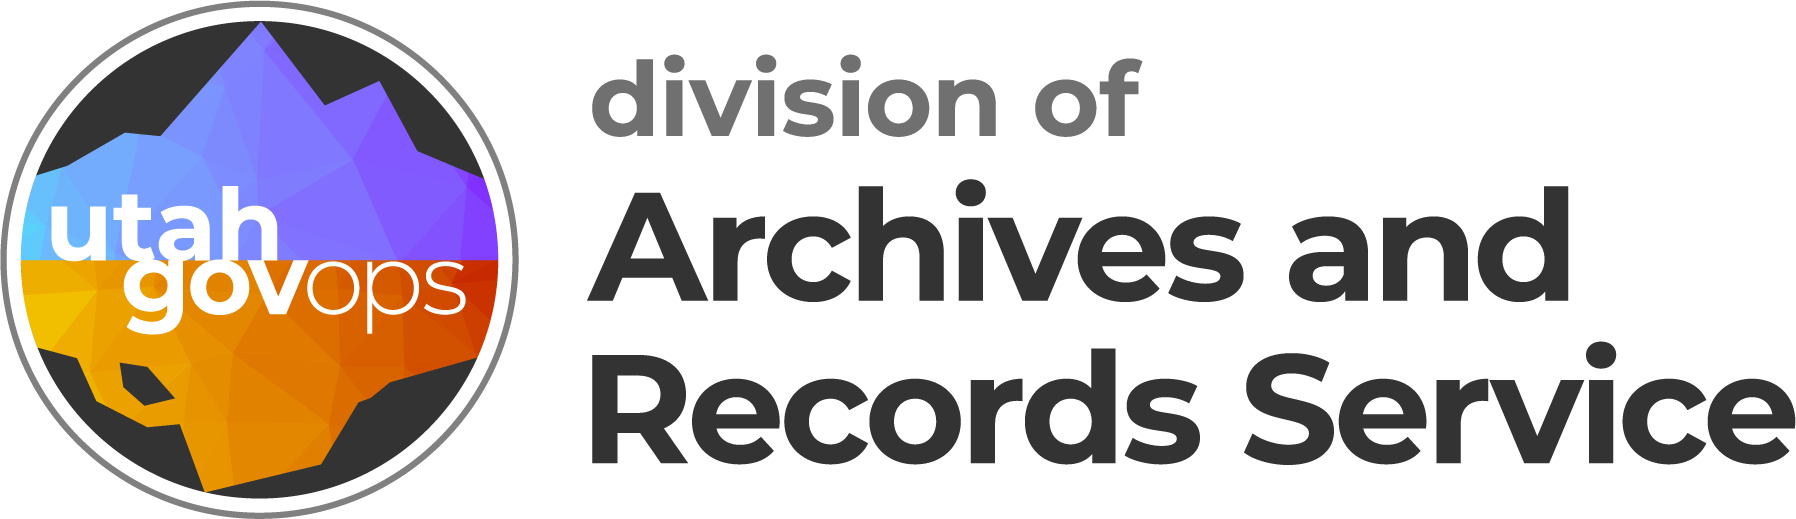 Division of Archives and Records Service logo